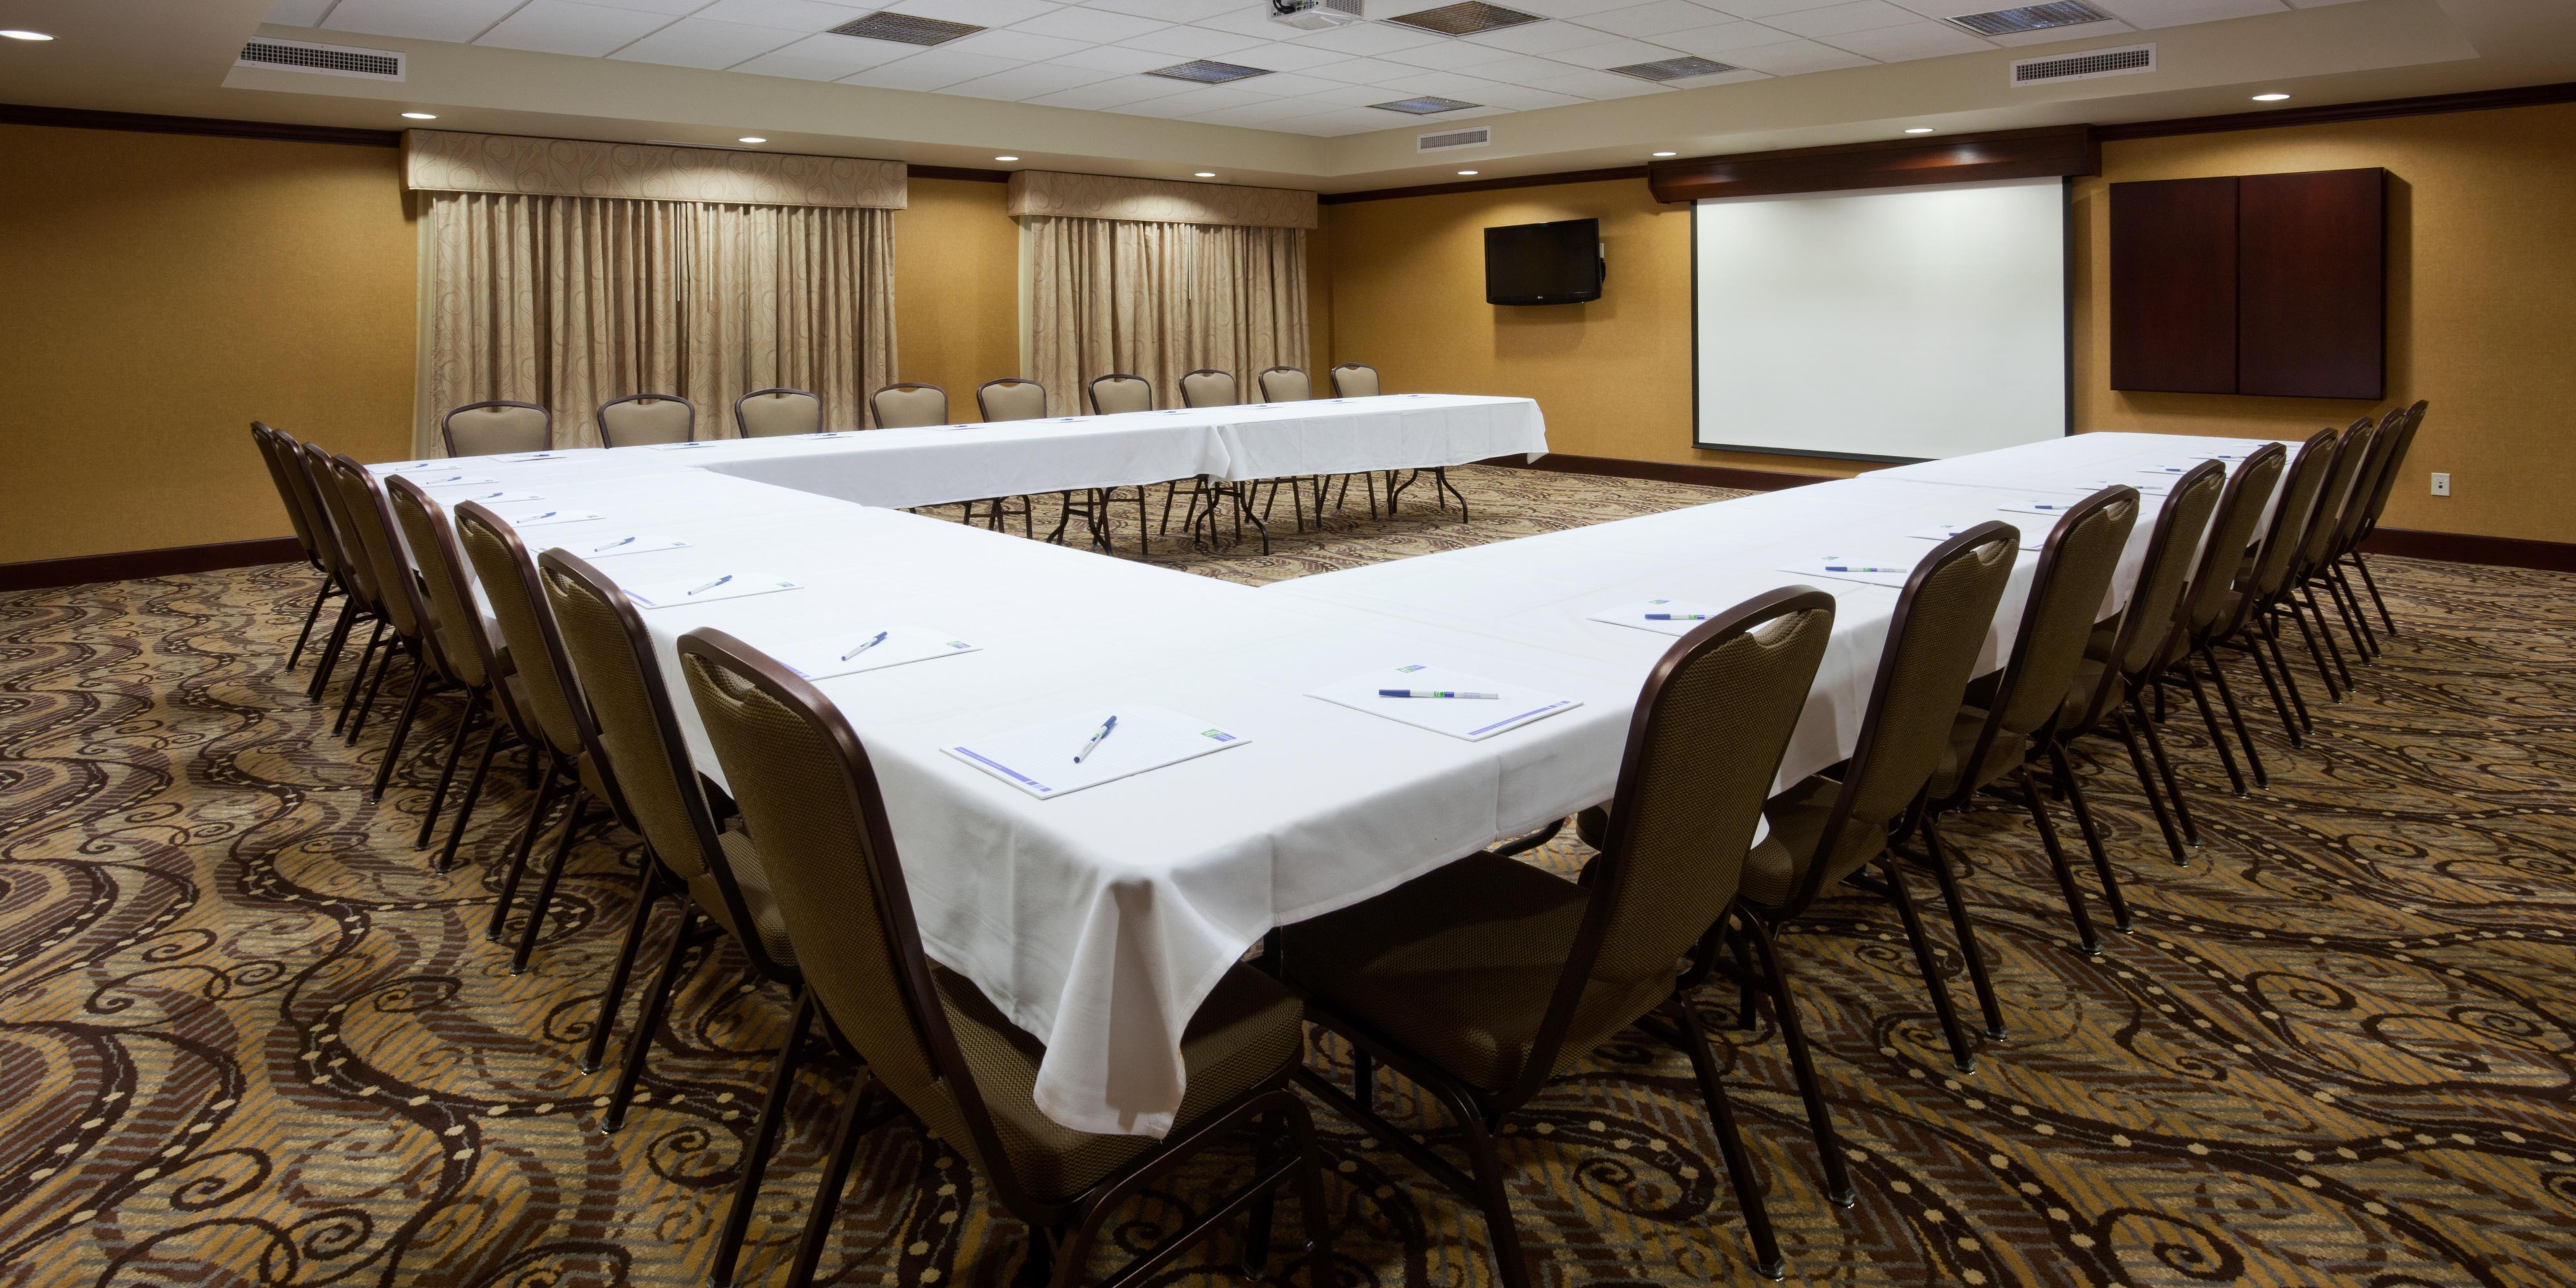 Did you know that we have a meeting room that can accommodate up to 45-50 people? Great for business meetings and social events such as birthday parties and rehearsal dinners, we are here to cater to your needs. Contact us today to check availability and prices. 